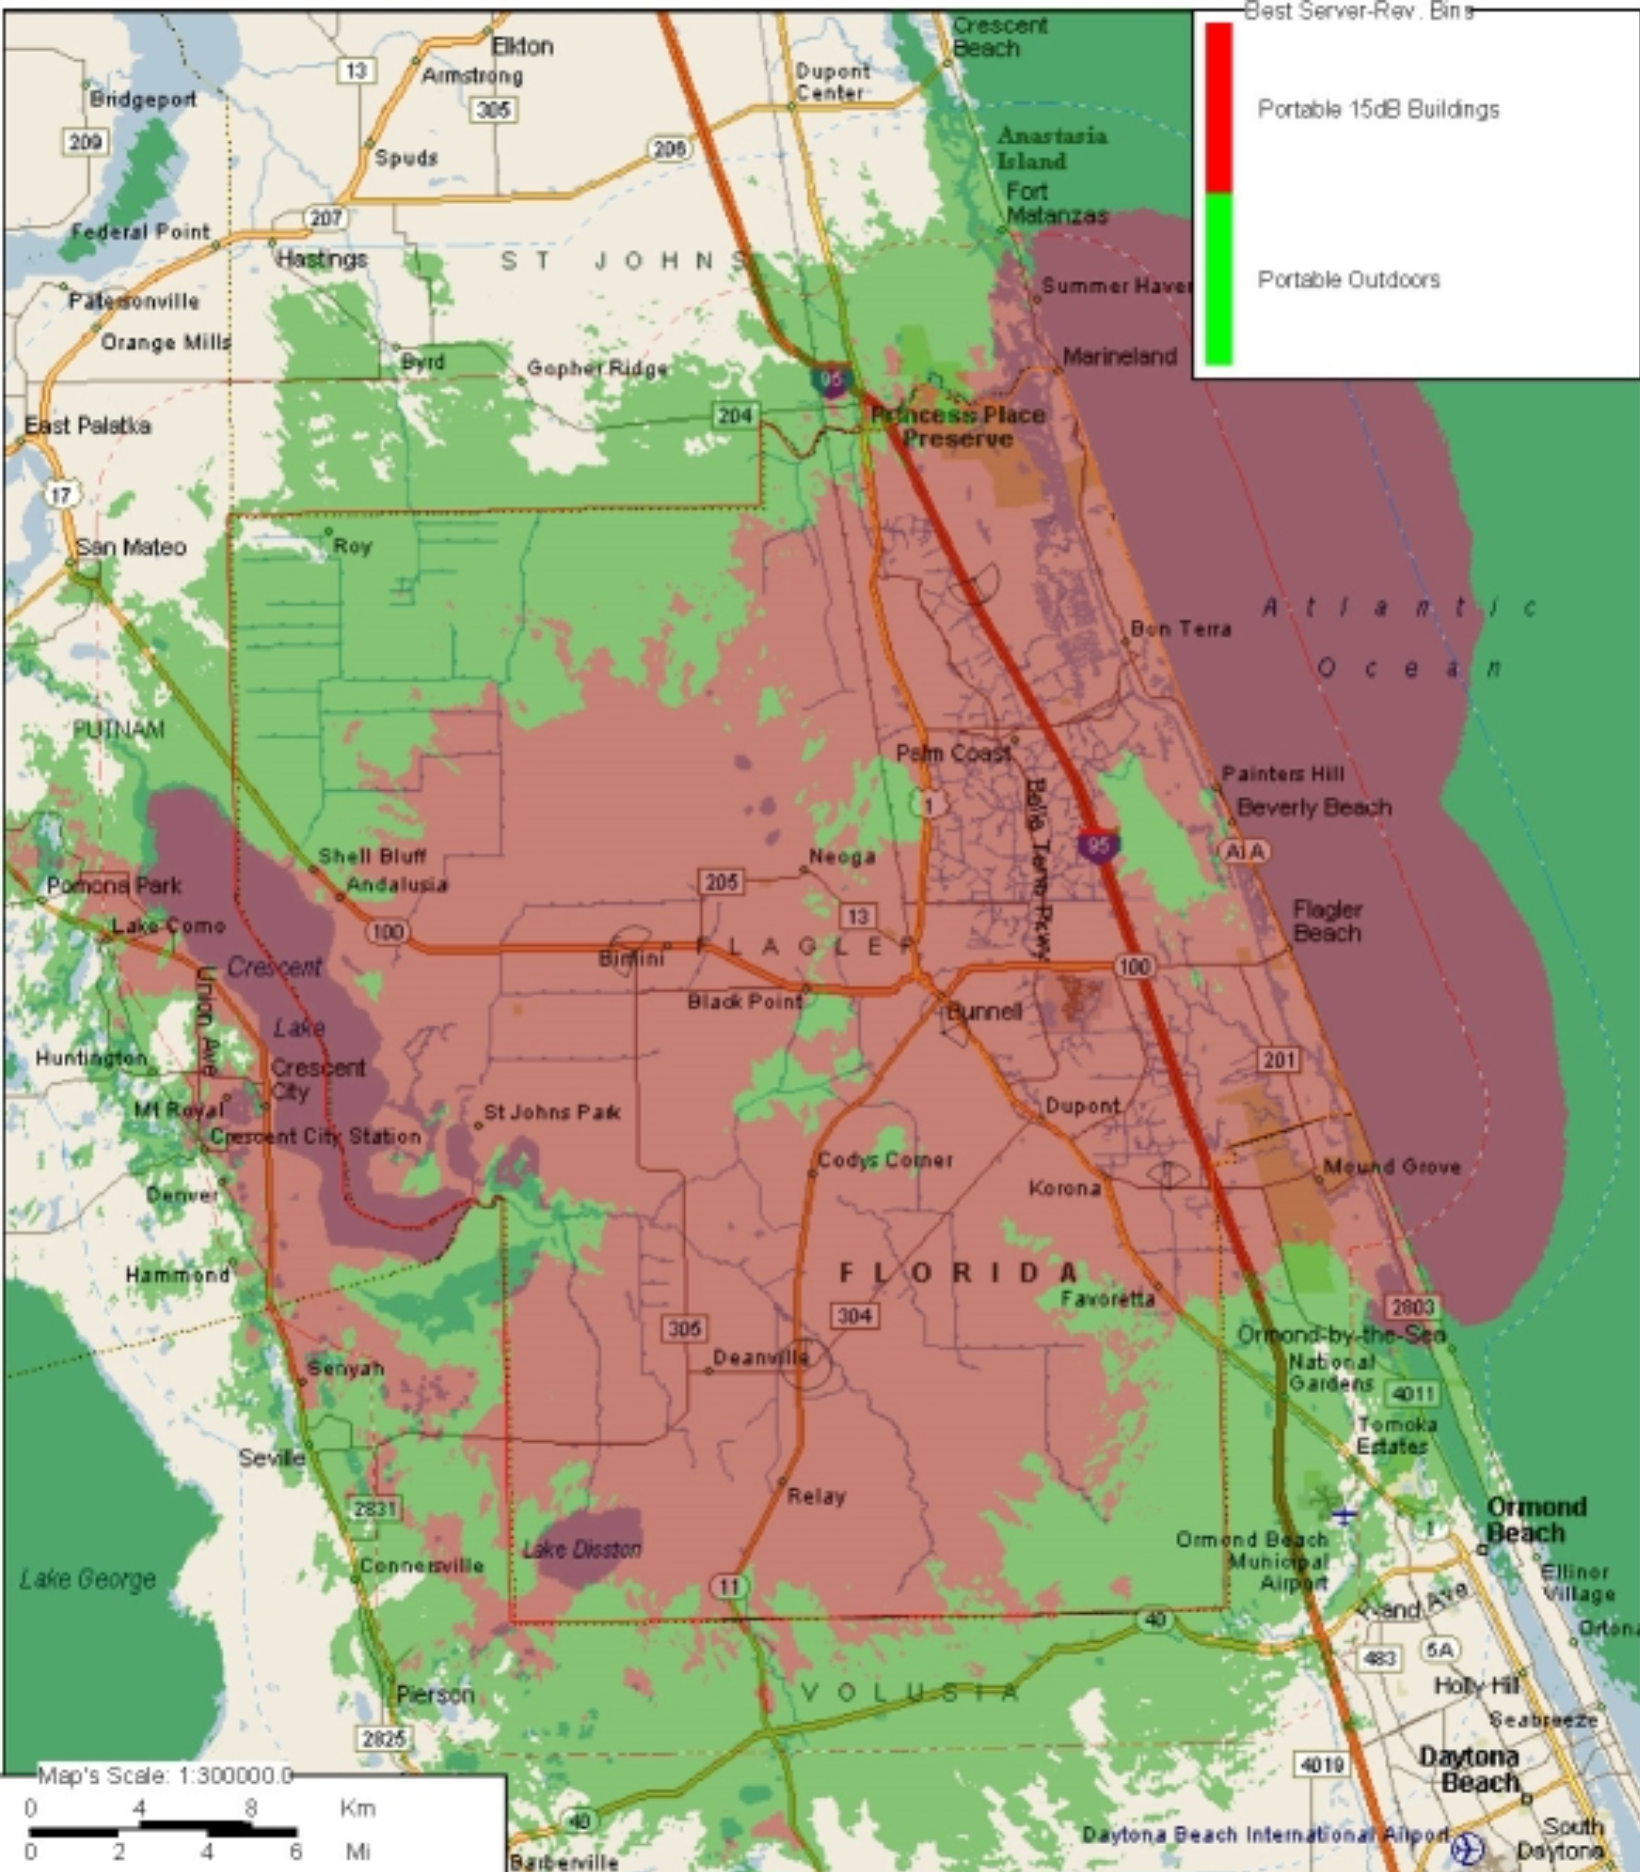 With the new radio system, the areas in red would have indoor as well as outdoor coverage, and the green areas would have outdoor coverage. (Image courtesy of the Flagler County government)